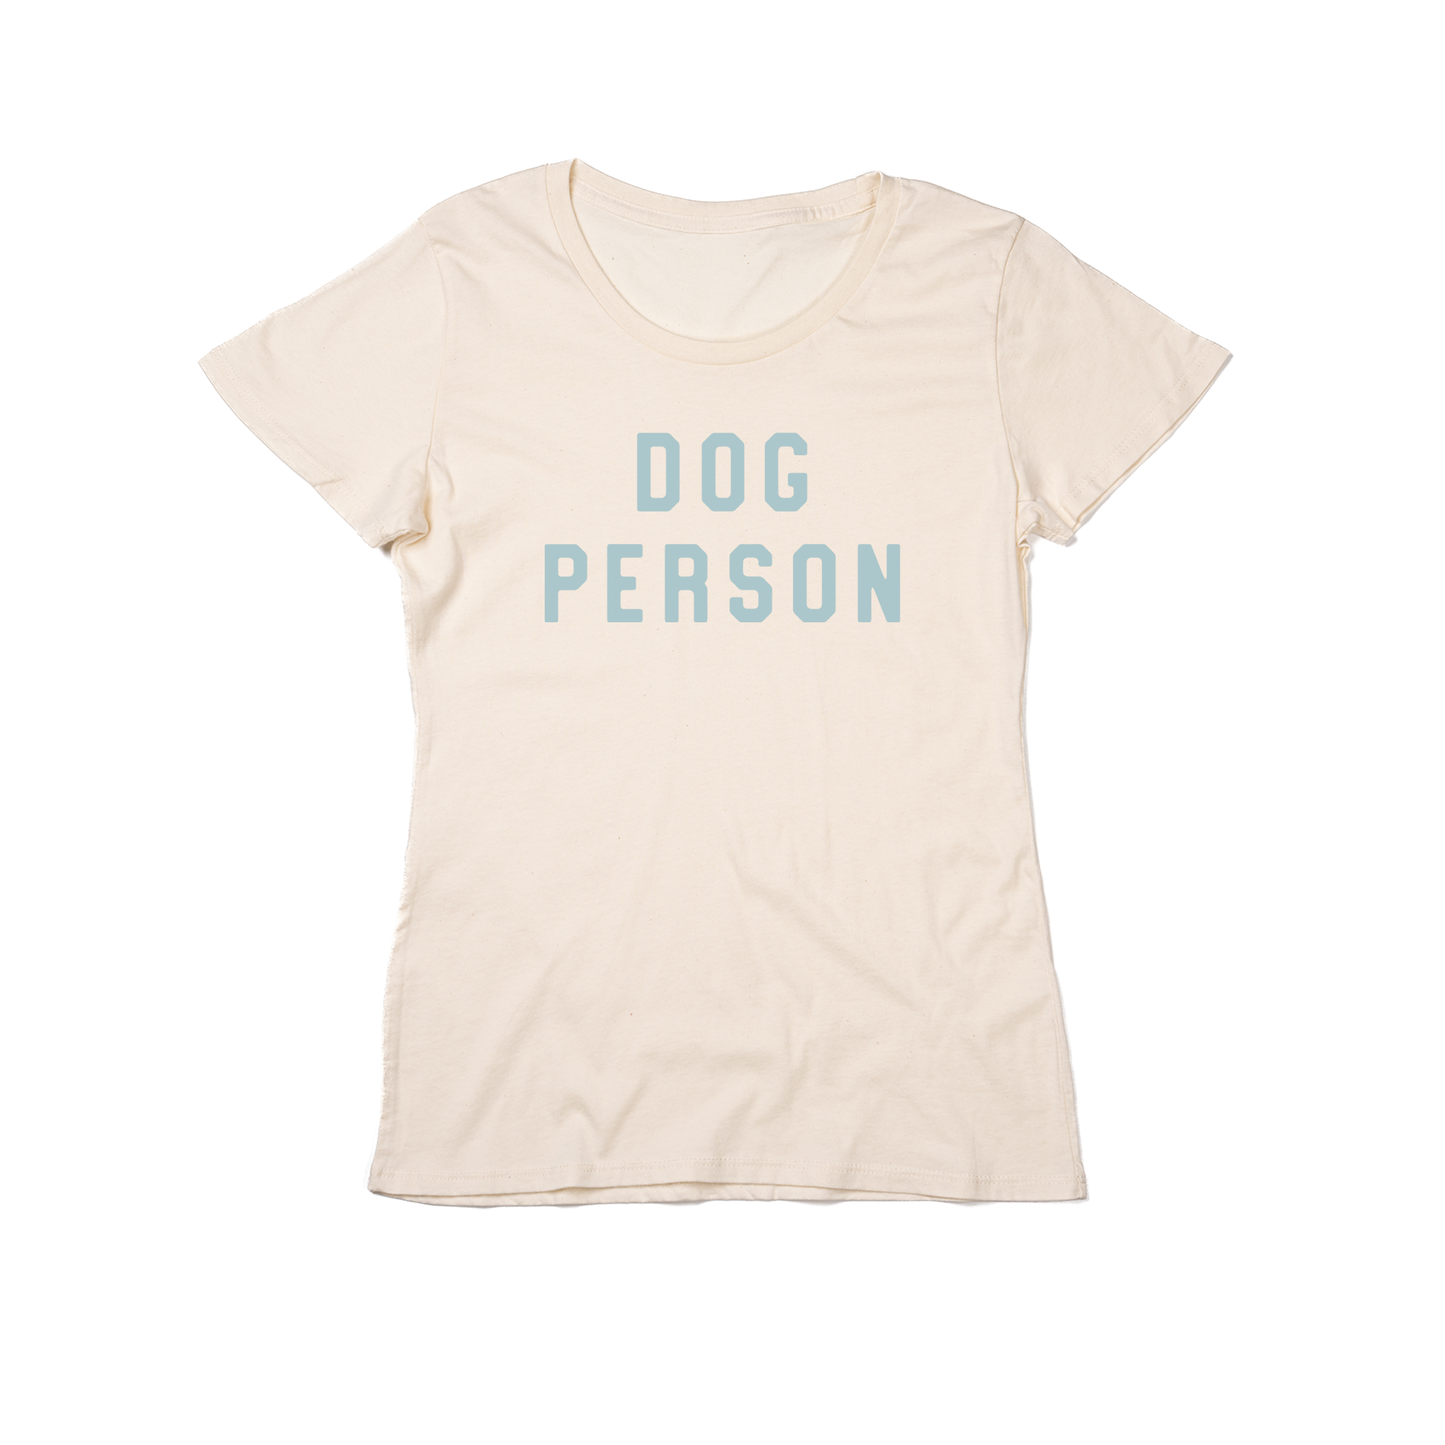 Dog Person (Sky) - Women's Fitted Tee (Natural)